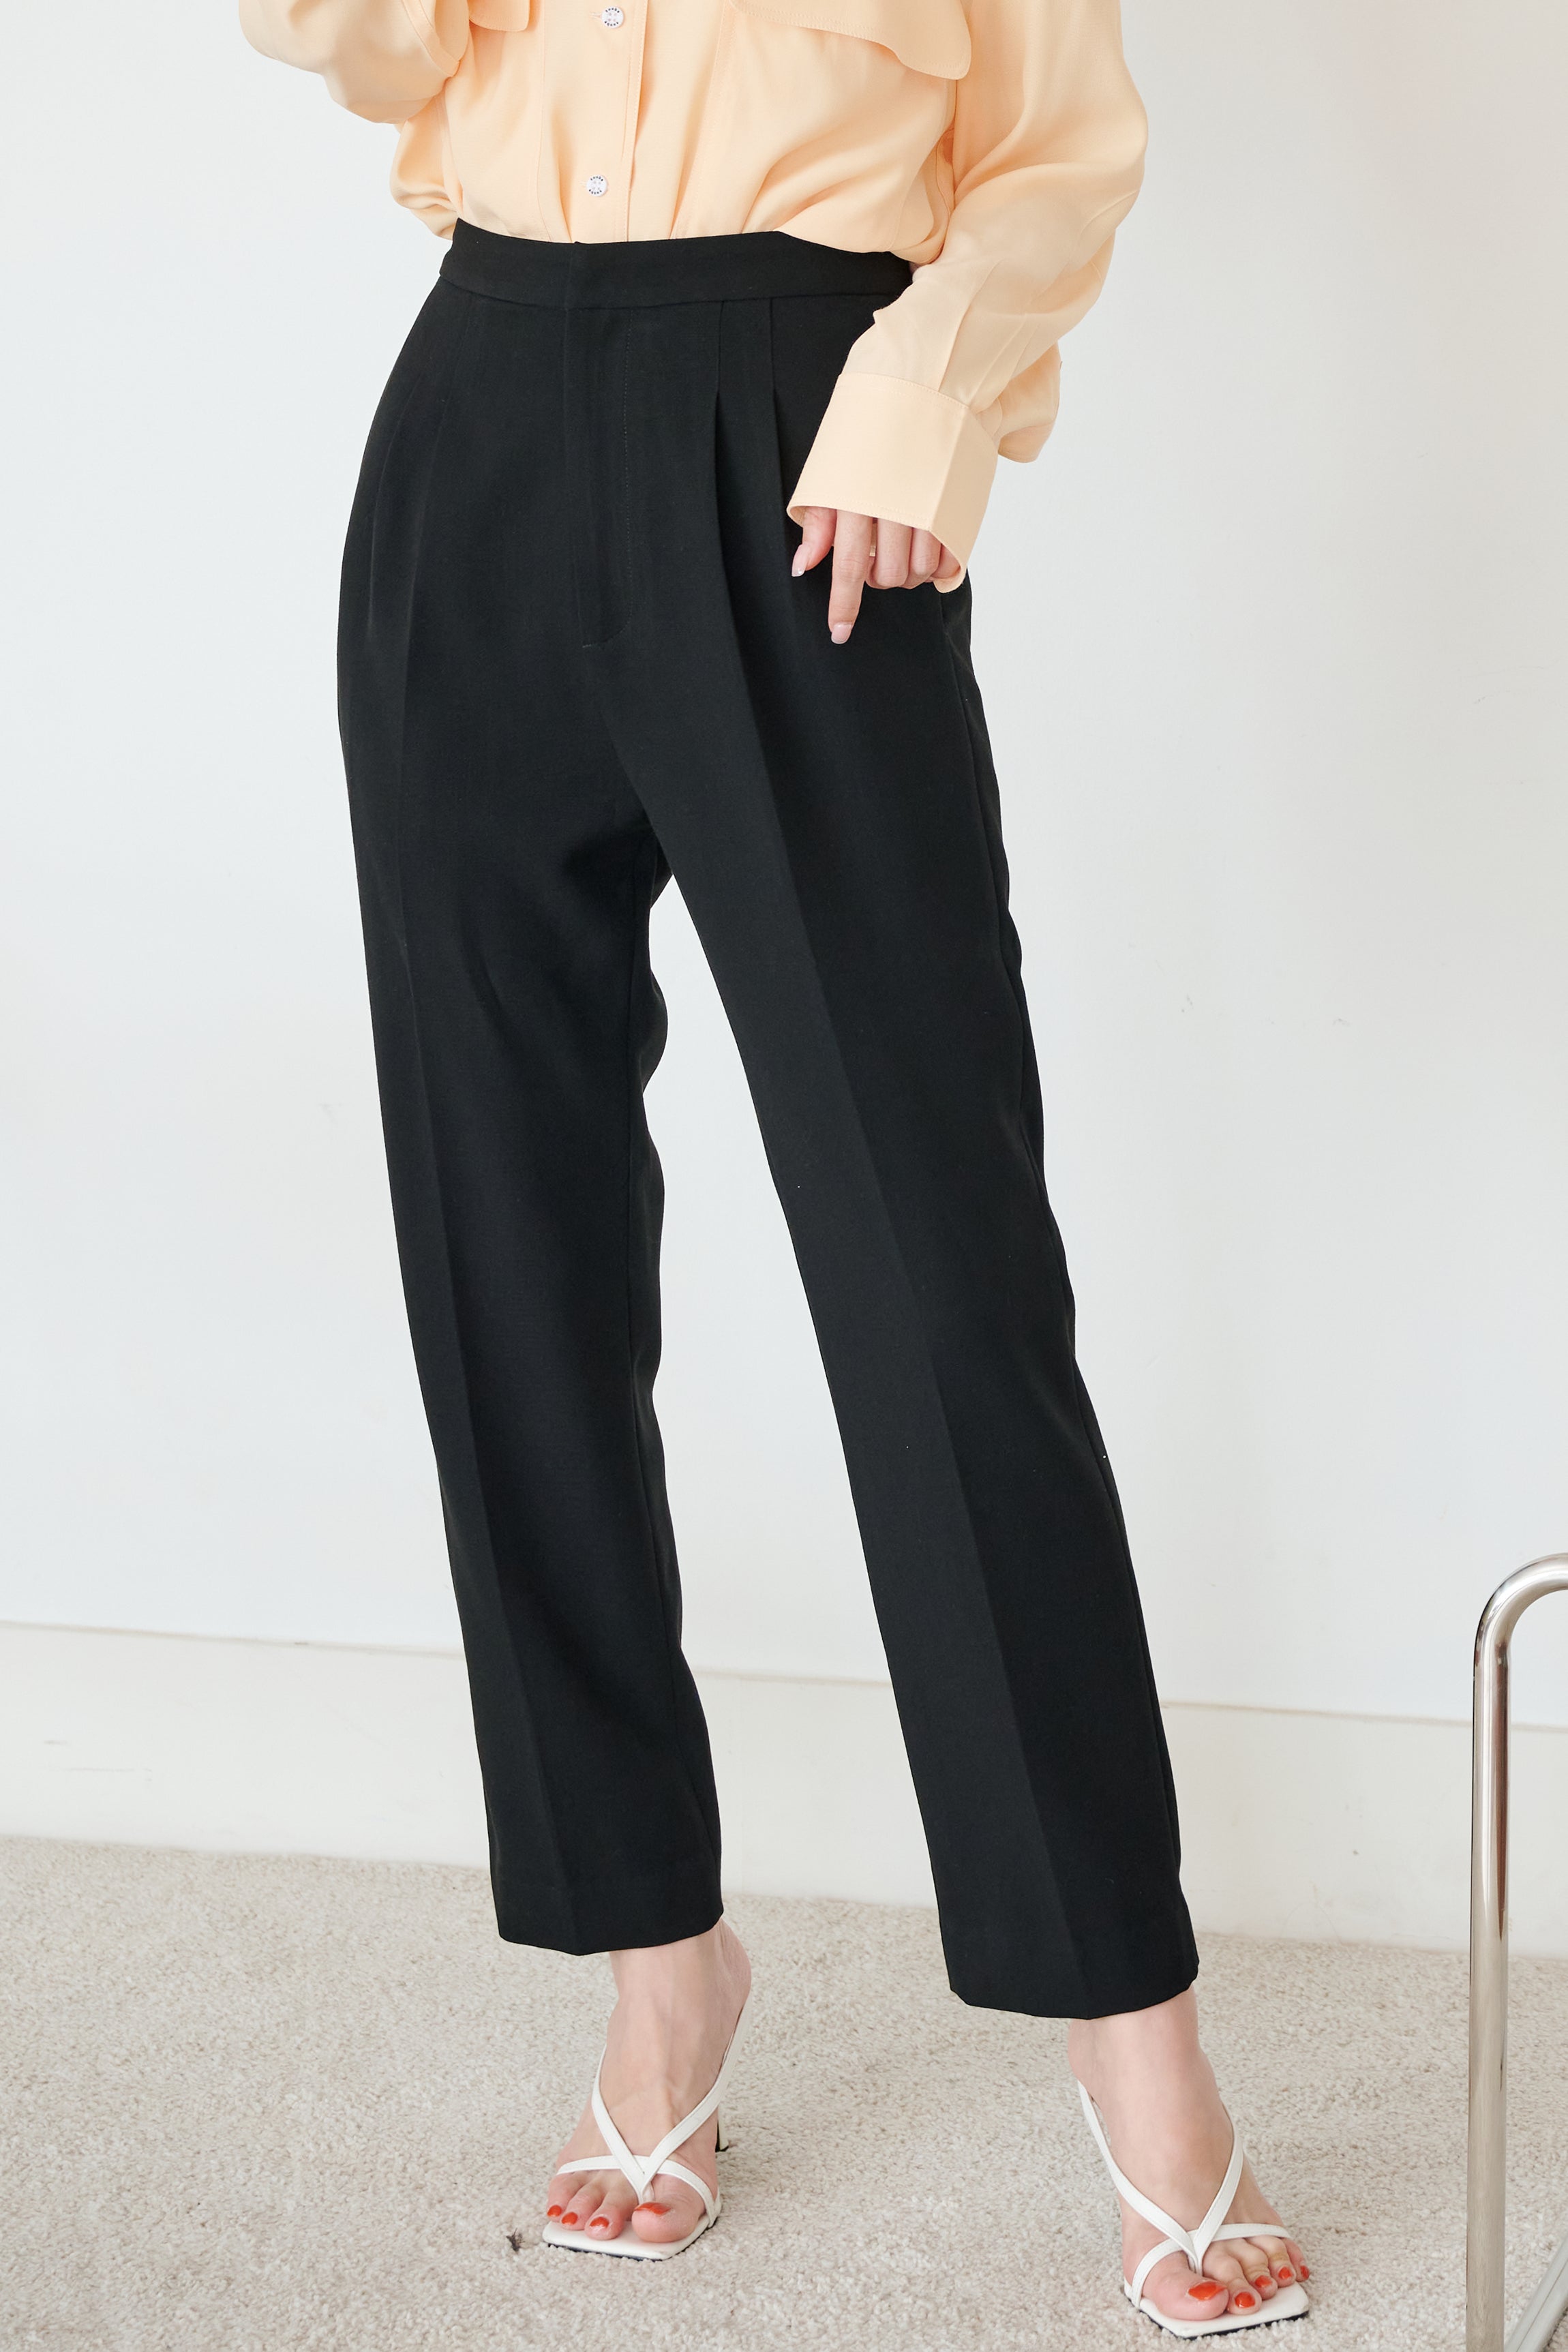 Going Trousers - Black